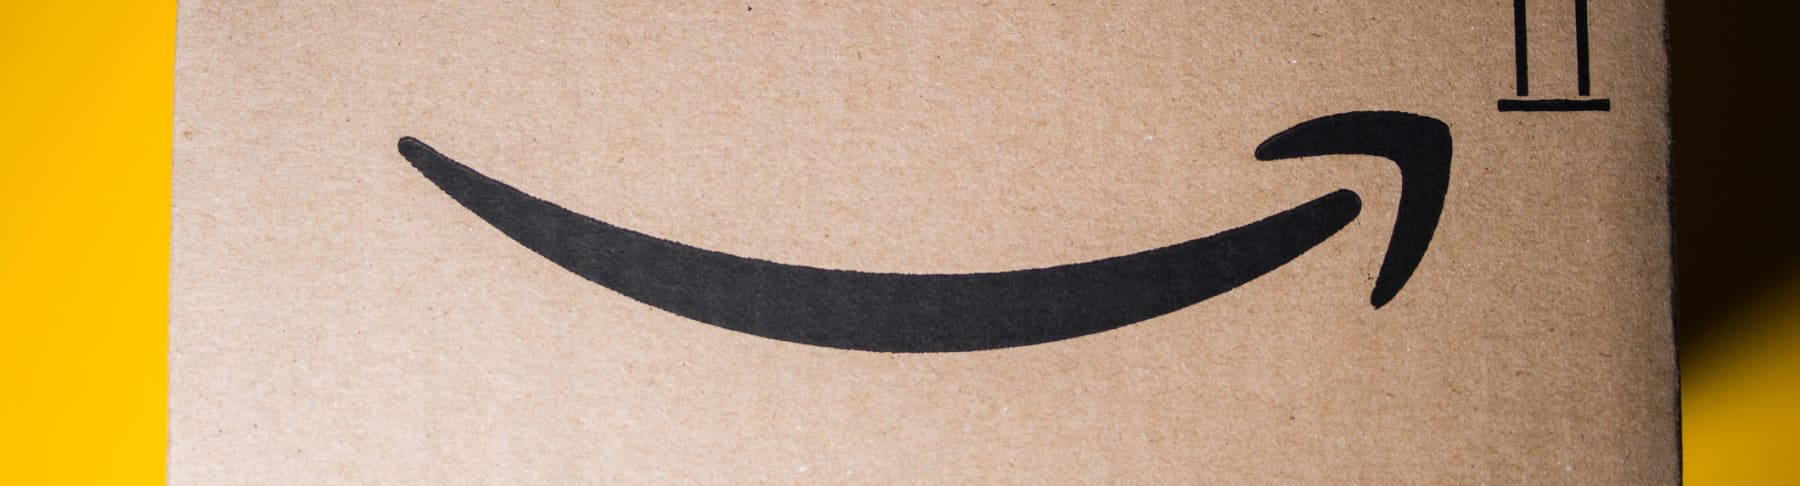 Cardboard Amazon box is shown in front of a yellow background.